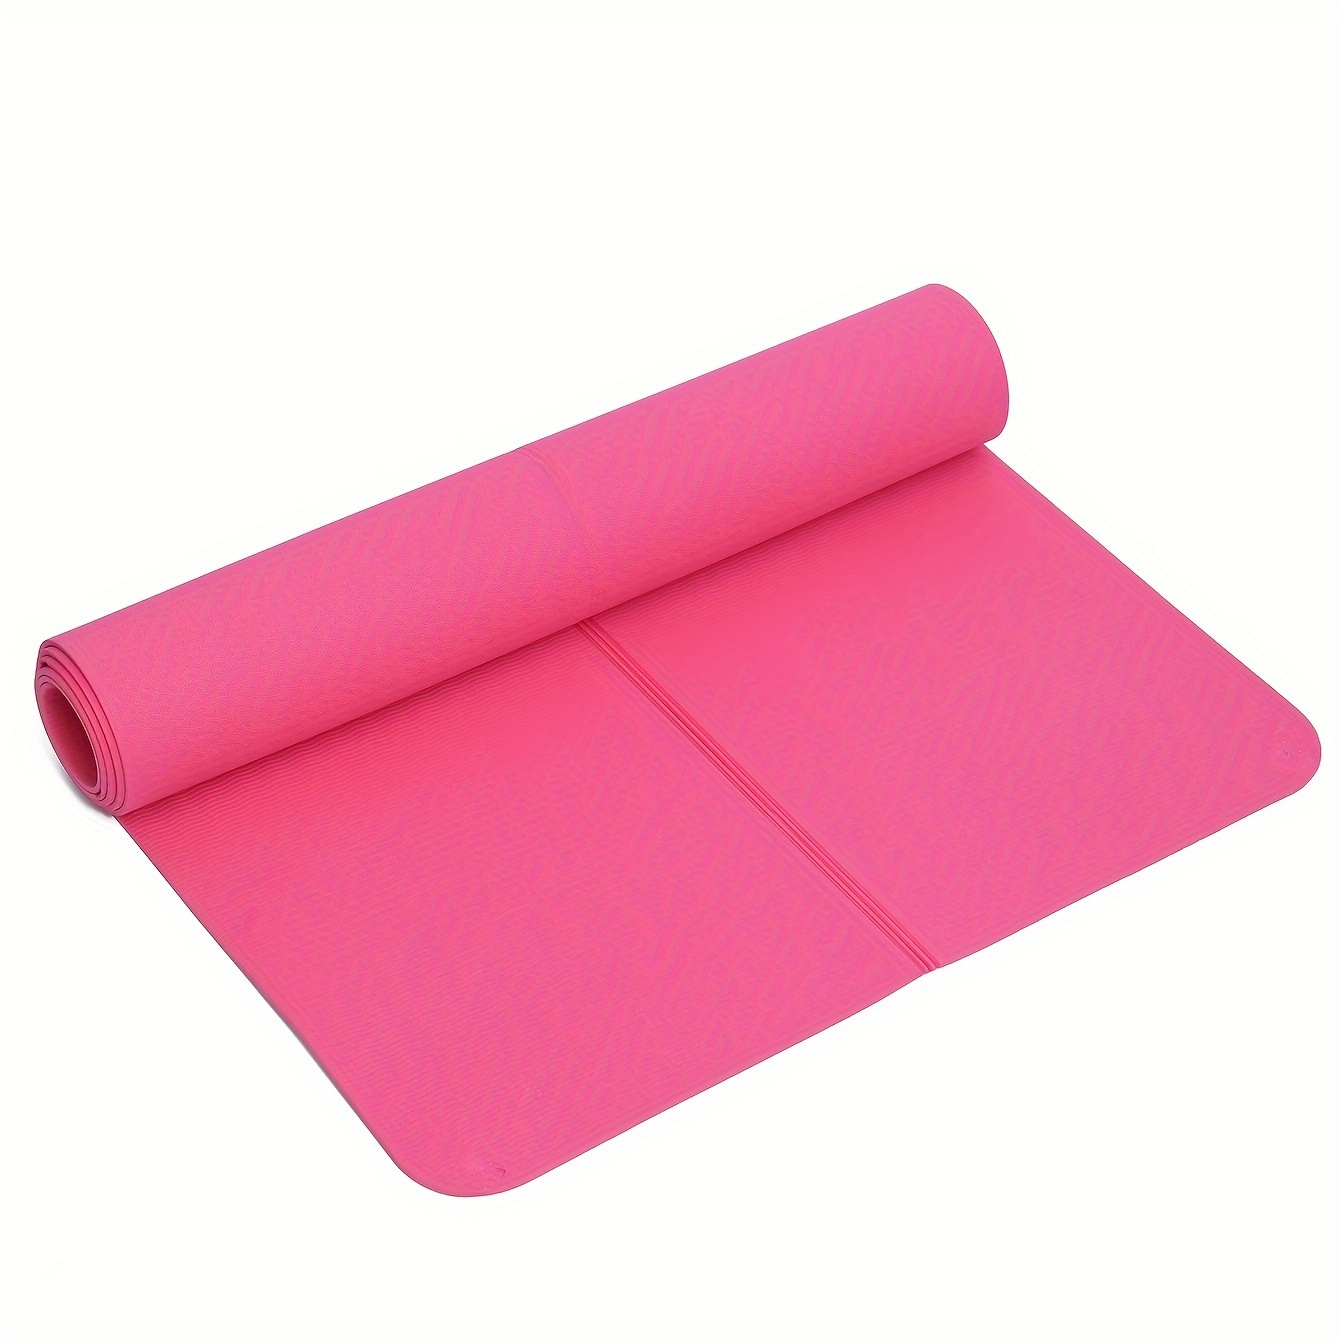 Thick Non slip Tpe Yoga Mat Comfortable Workouts Relaxation - Temu